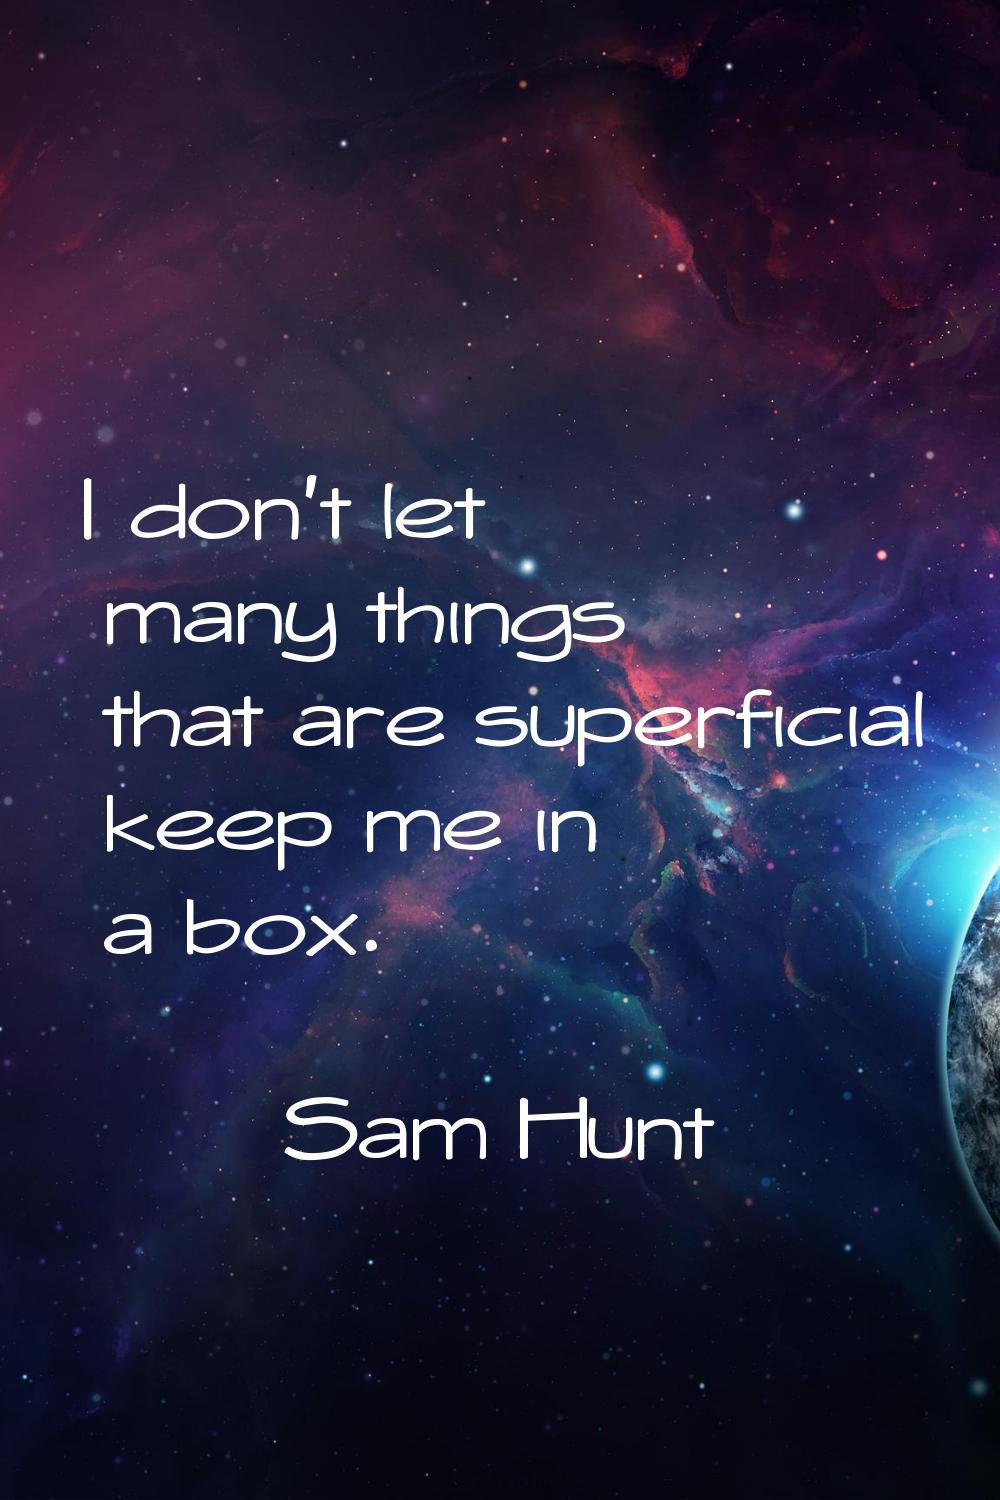 I don't let many things that are superficial keep me in a box.